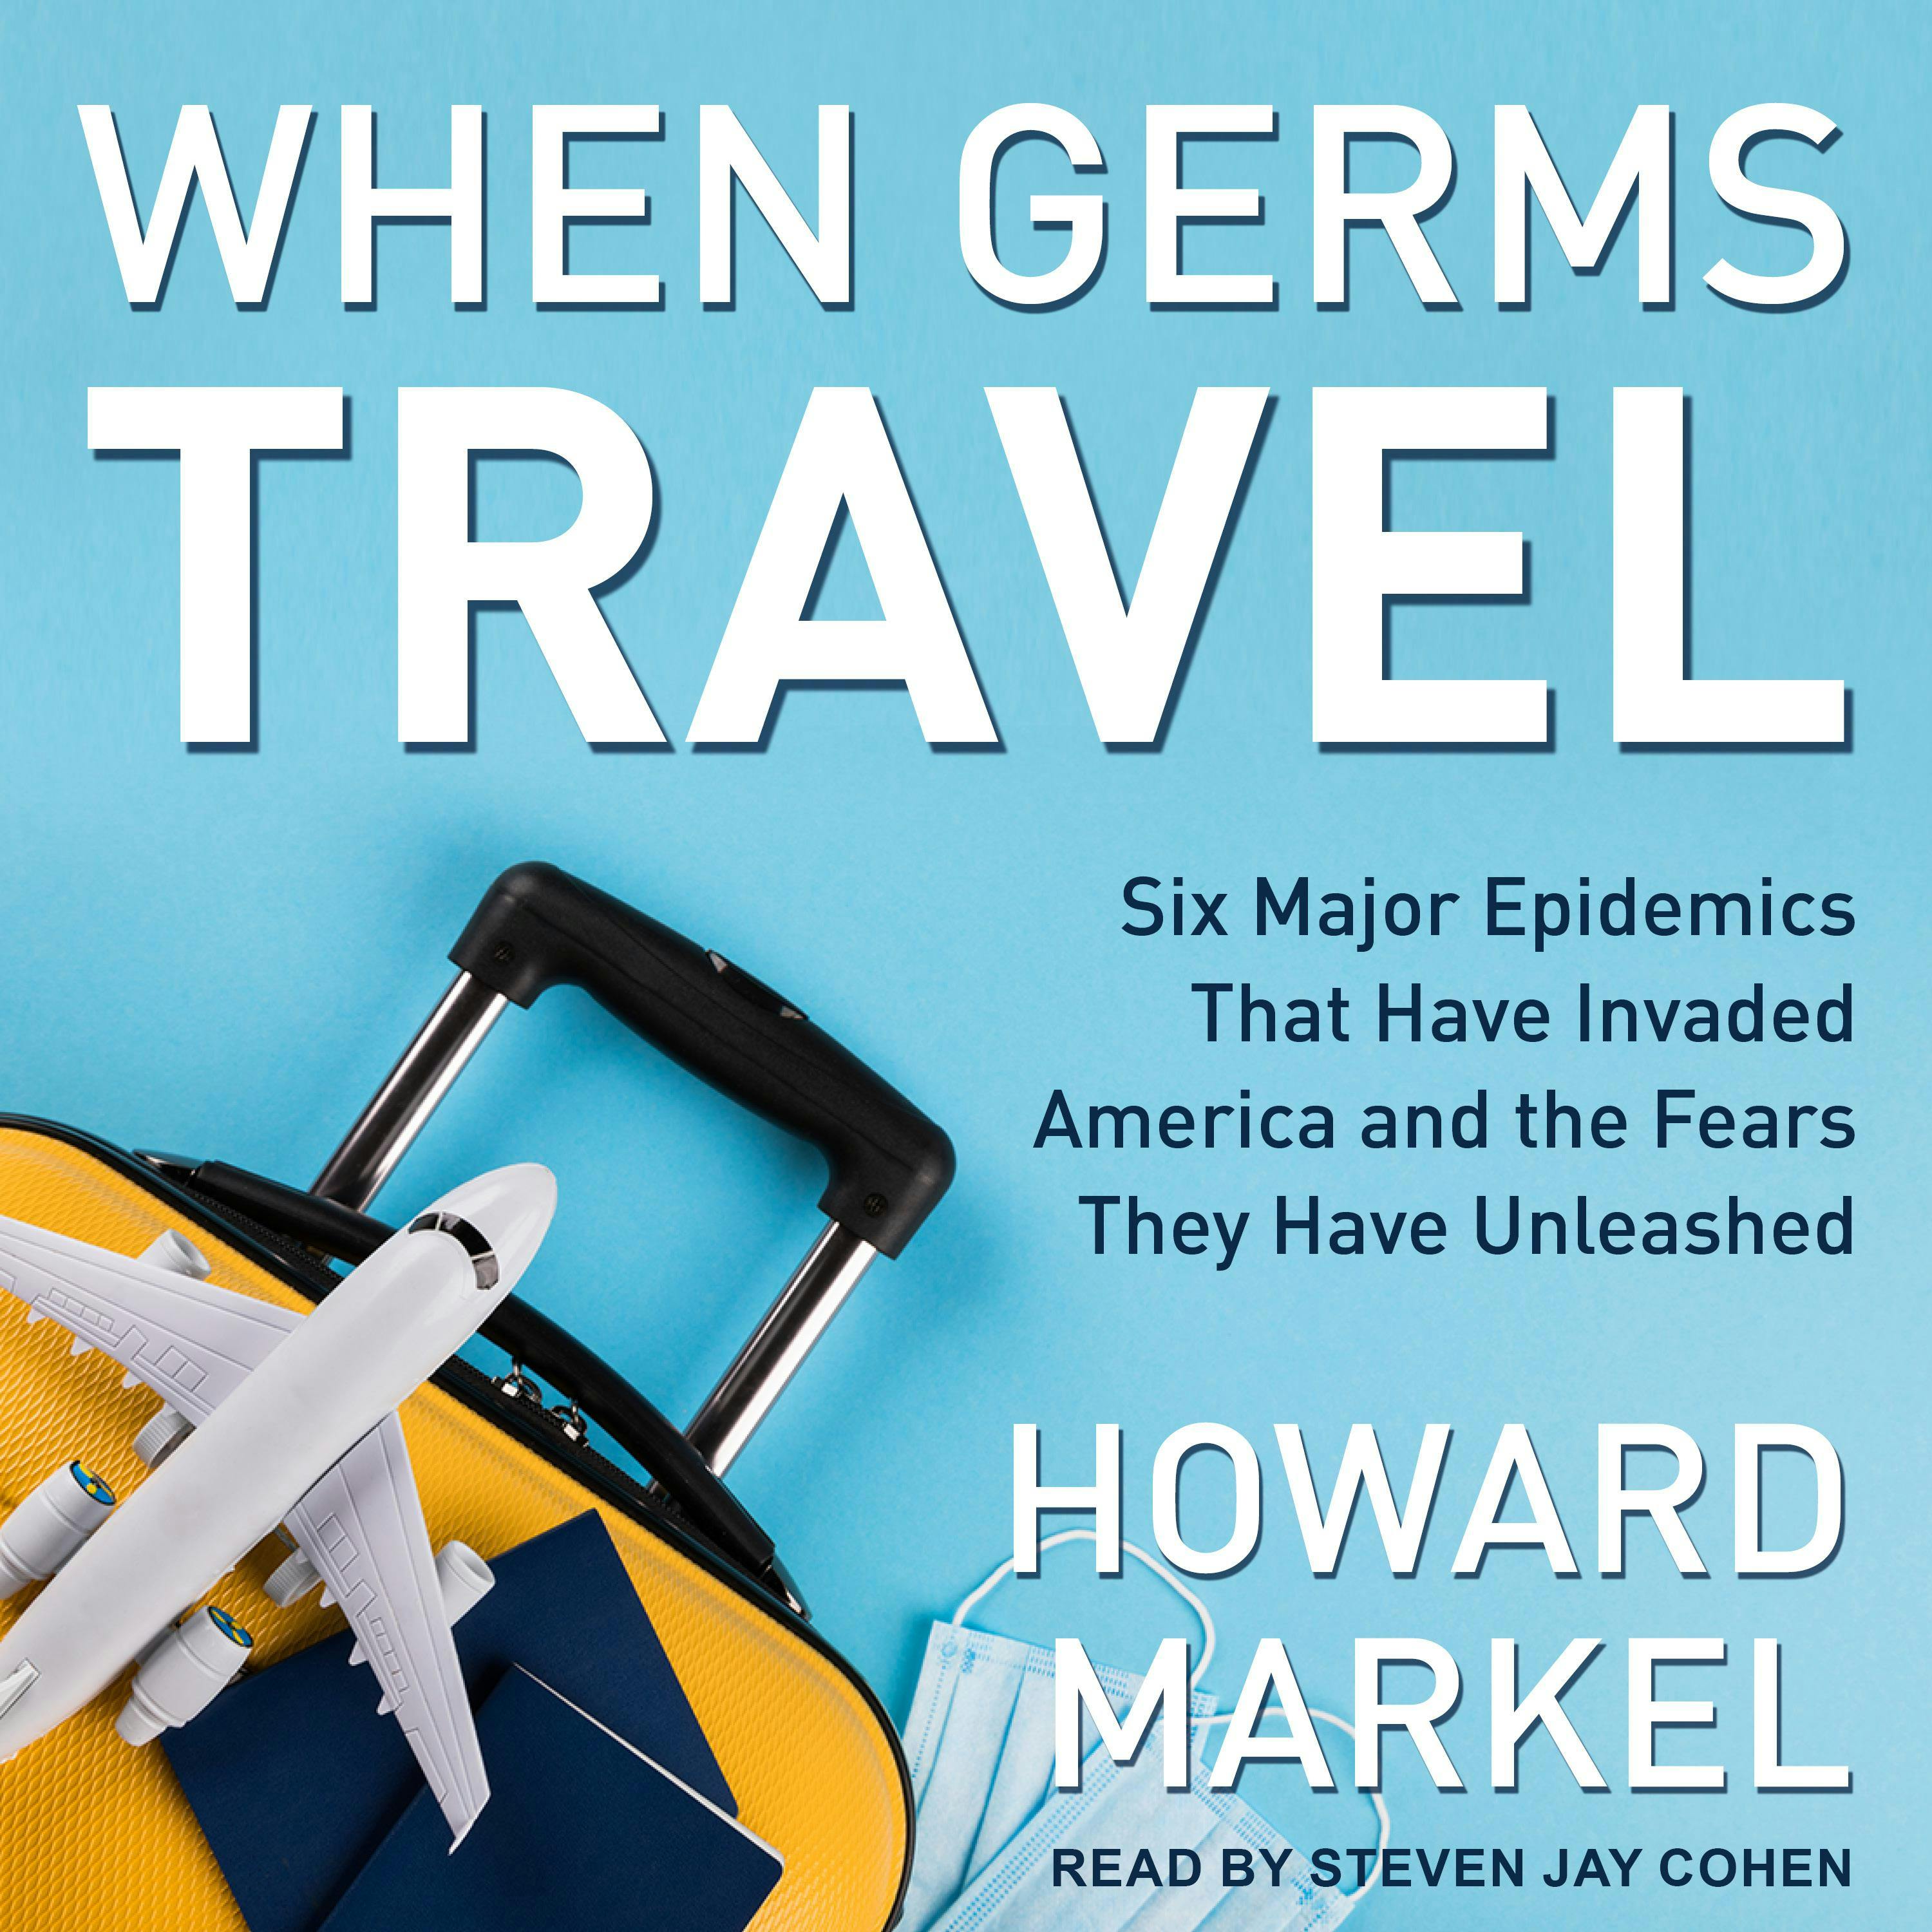 When Germs Travel: Six Major Epidemics That Have Invaded America and the Fears They Have Unleashed - Howard Markel